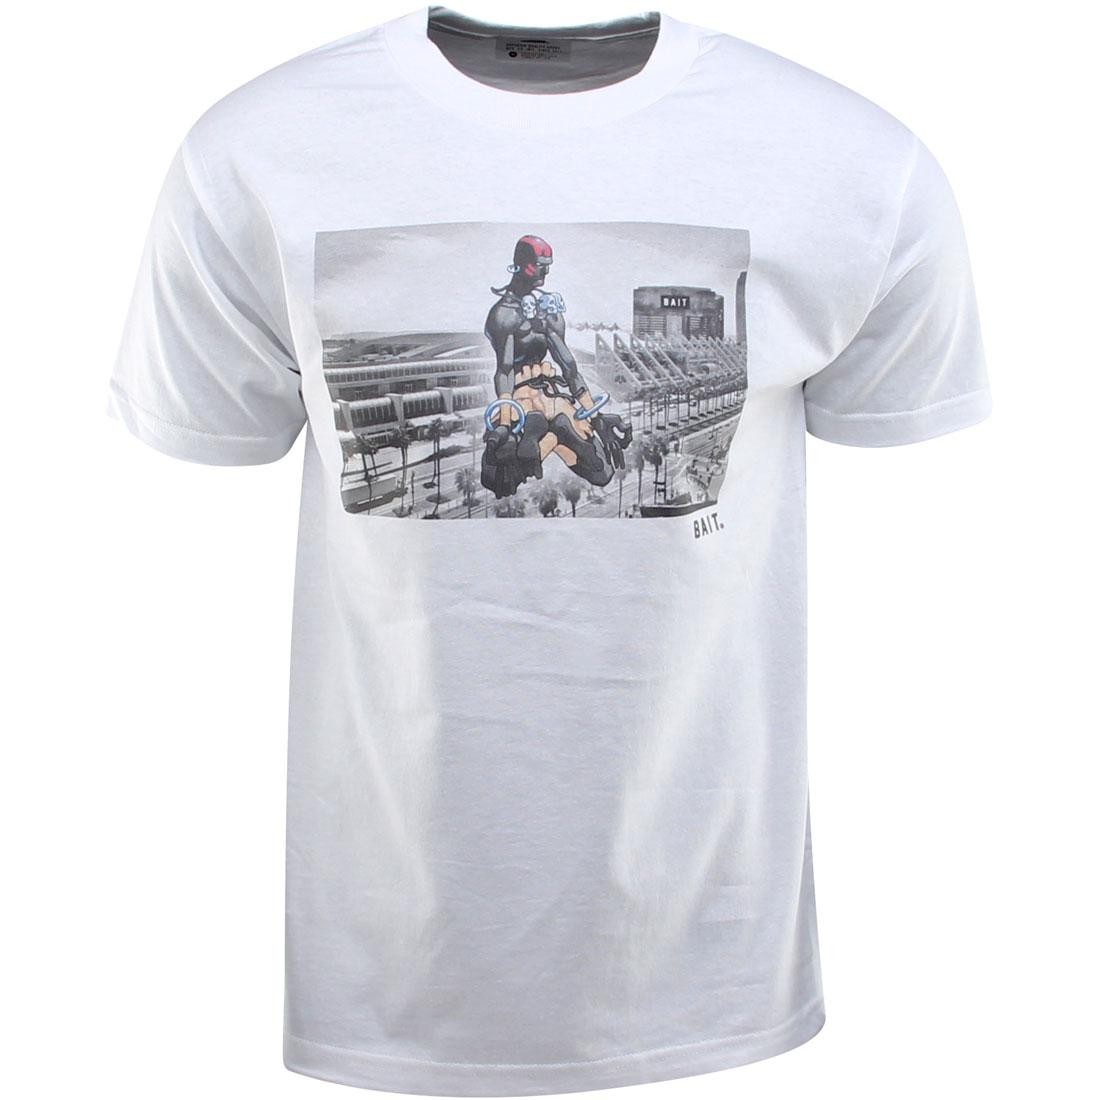 Cheap 127-0 Jordan Outlet x Street Fighter Limited Edition Dhalsim Snapshot Tee (white) - Cheap 127-0 Jordan Outlet SDCC Exclusive